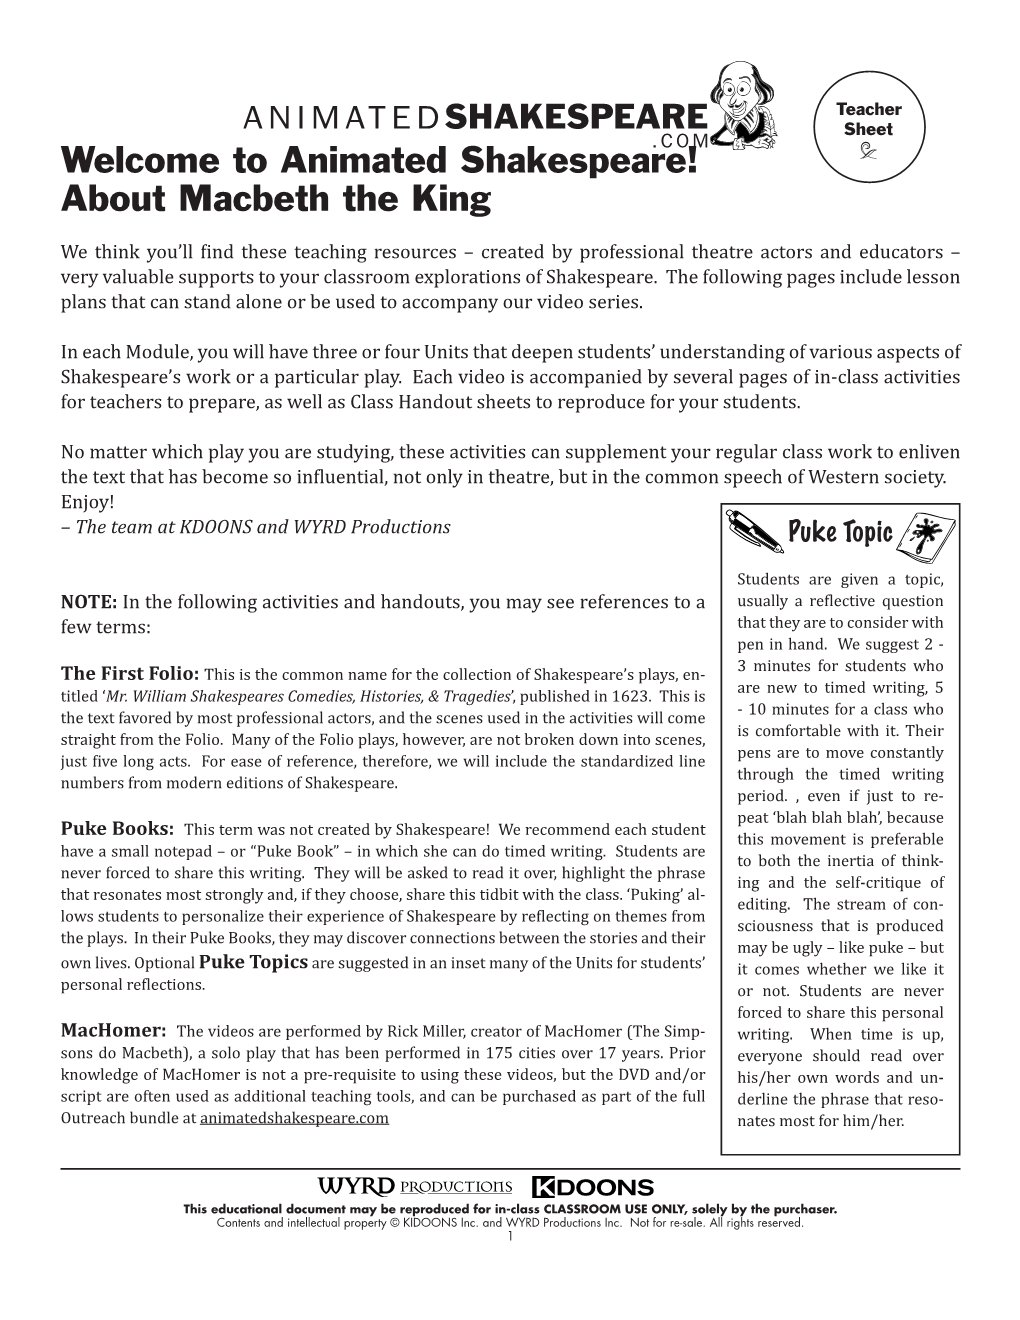 Welcome to Animated Shakespeare! About Macbeth the King